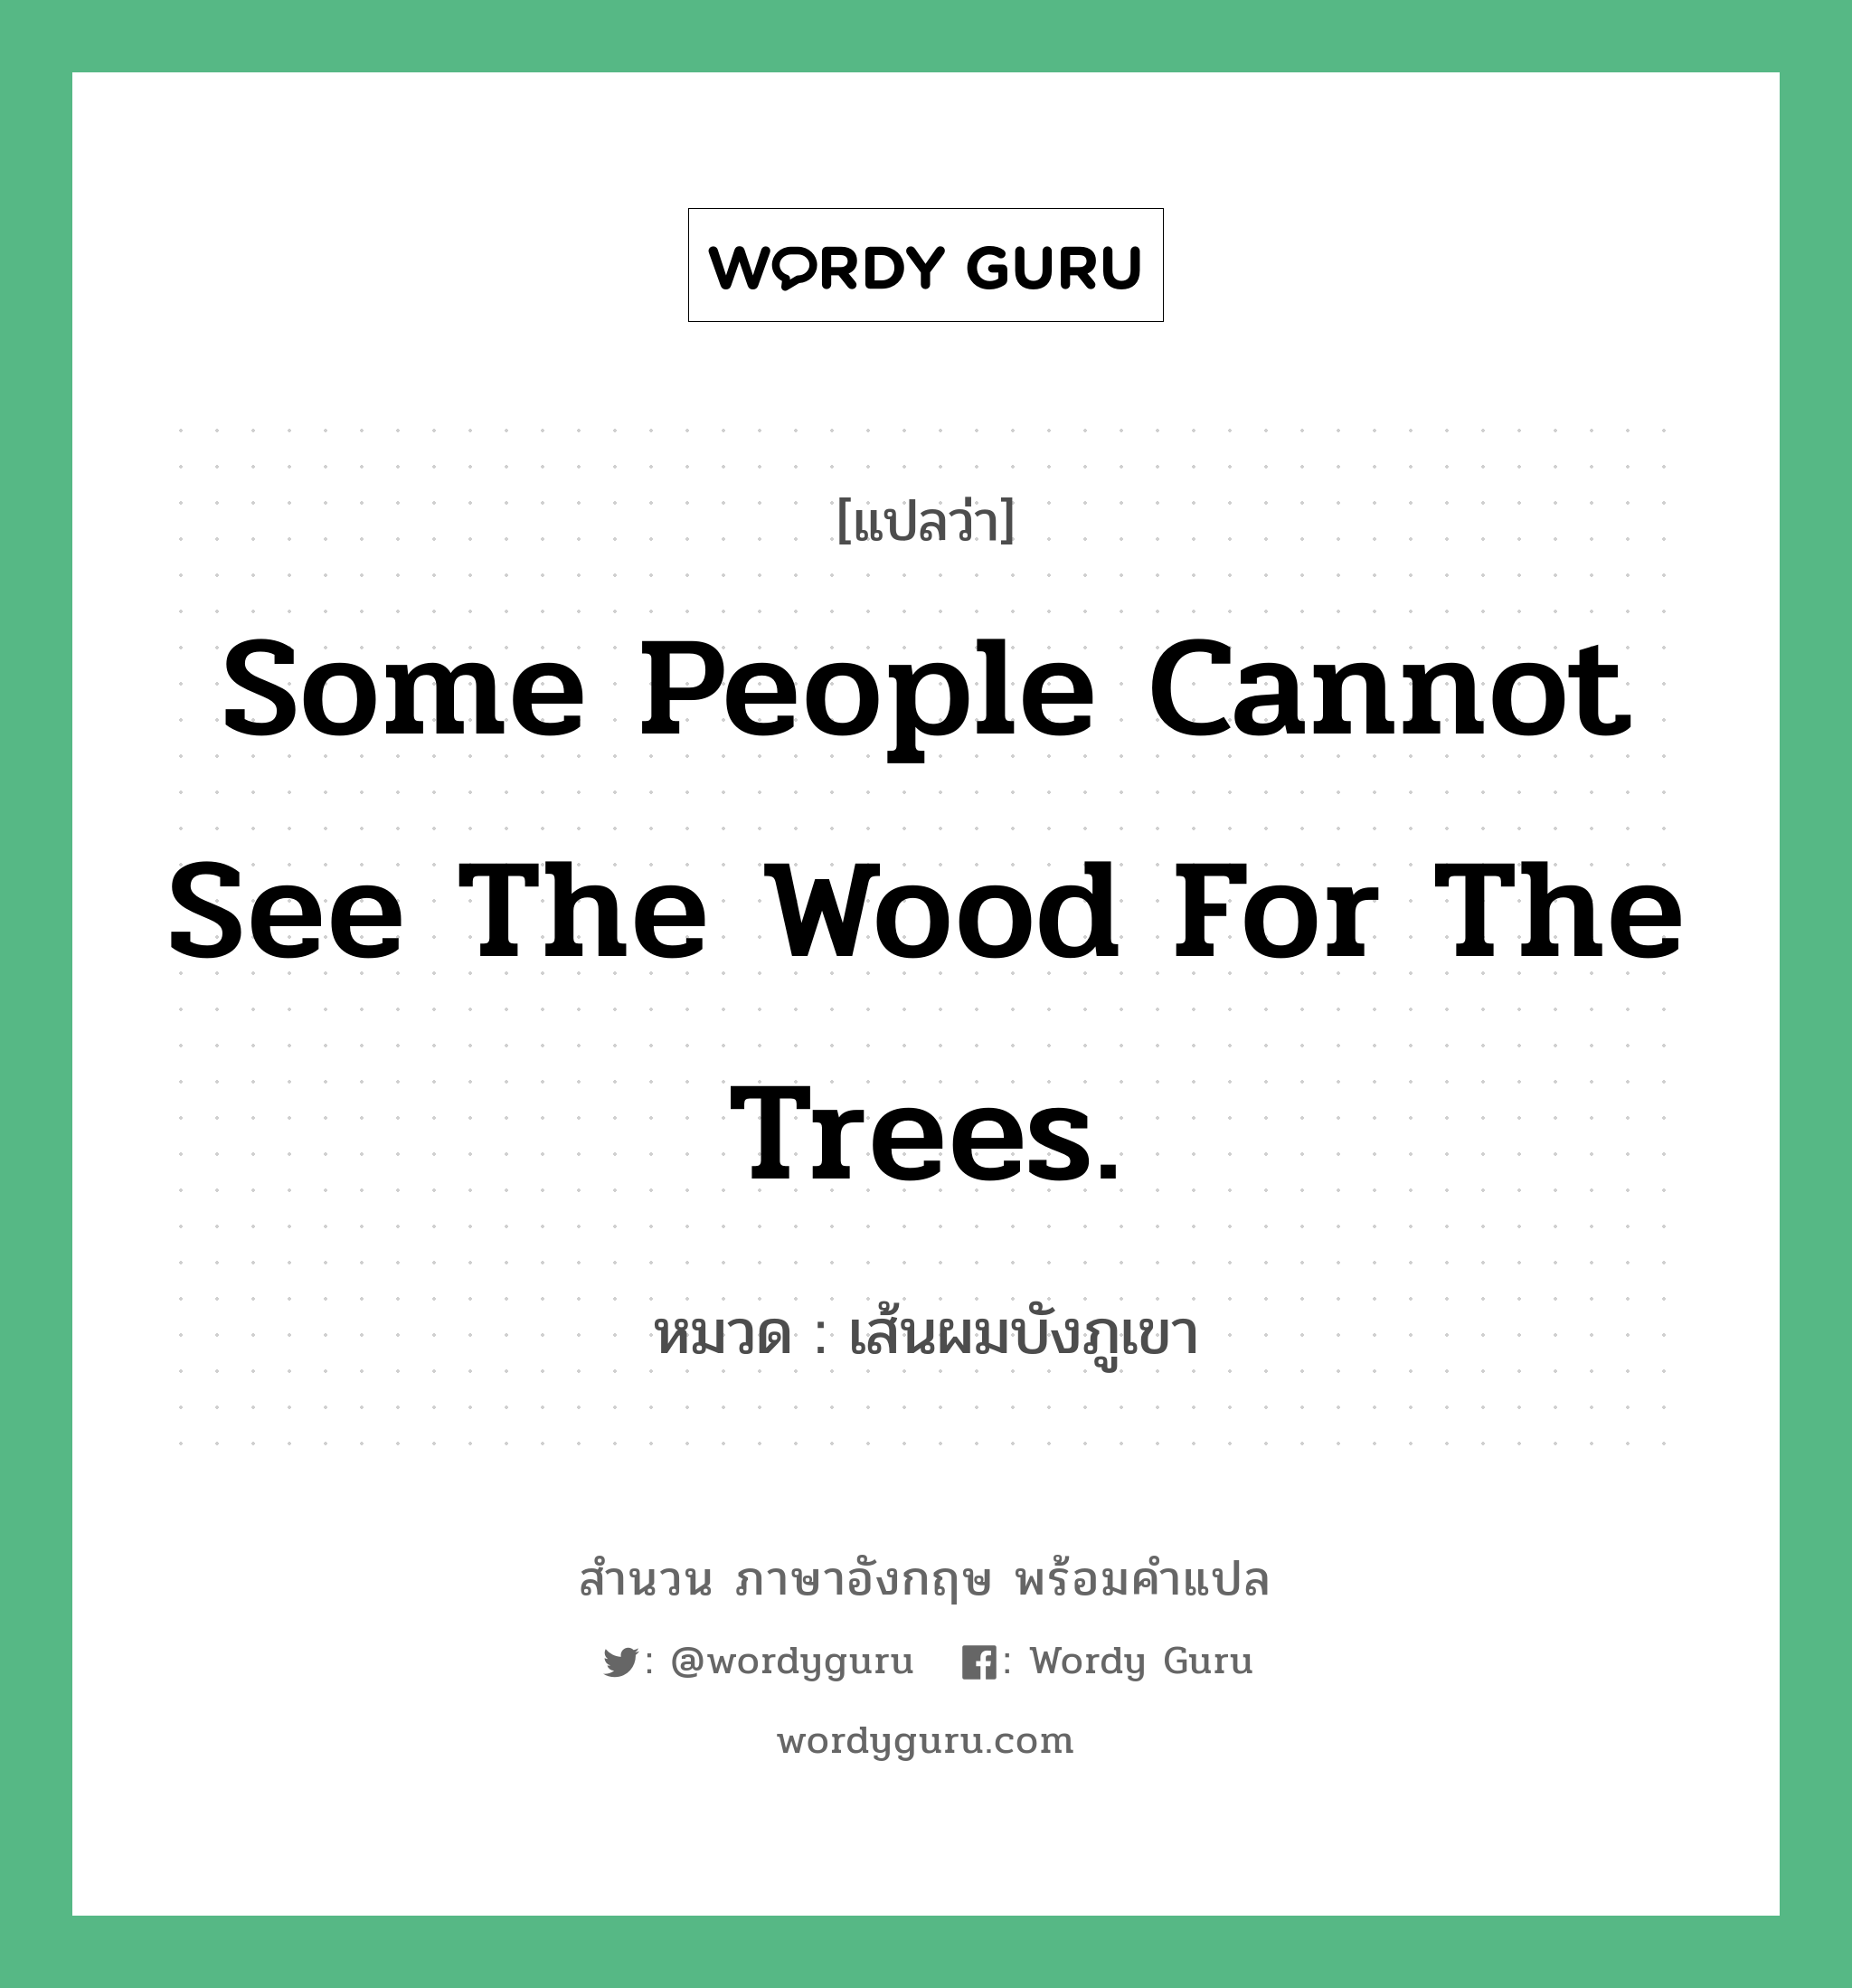 Some people cannot see the wood for the trees. แปลว่า?, สำนวนภาษาอังกฤษ Some people cannot see the wood for the trees. หมวด เส้นผมบังภูเขา คำสุภาษิต ภาษาอังกฤษ หมวด คำสุภาษิต ภาษาอังกฤษ